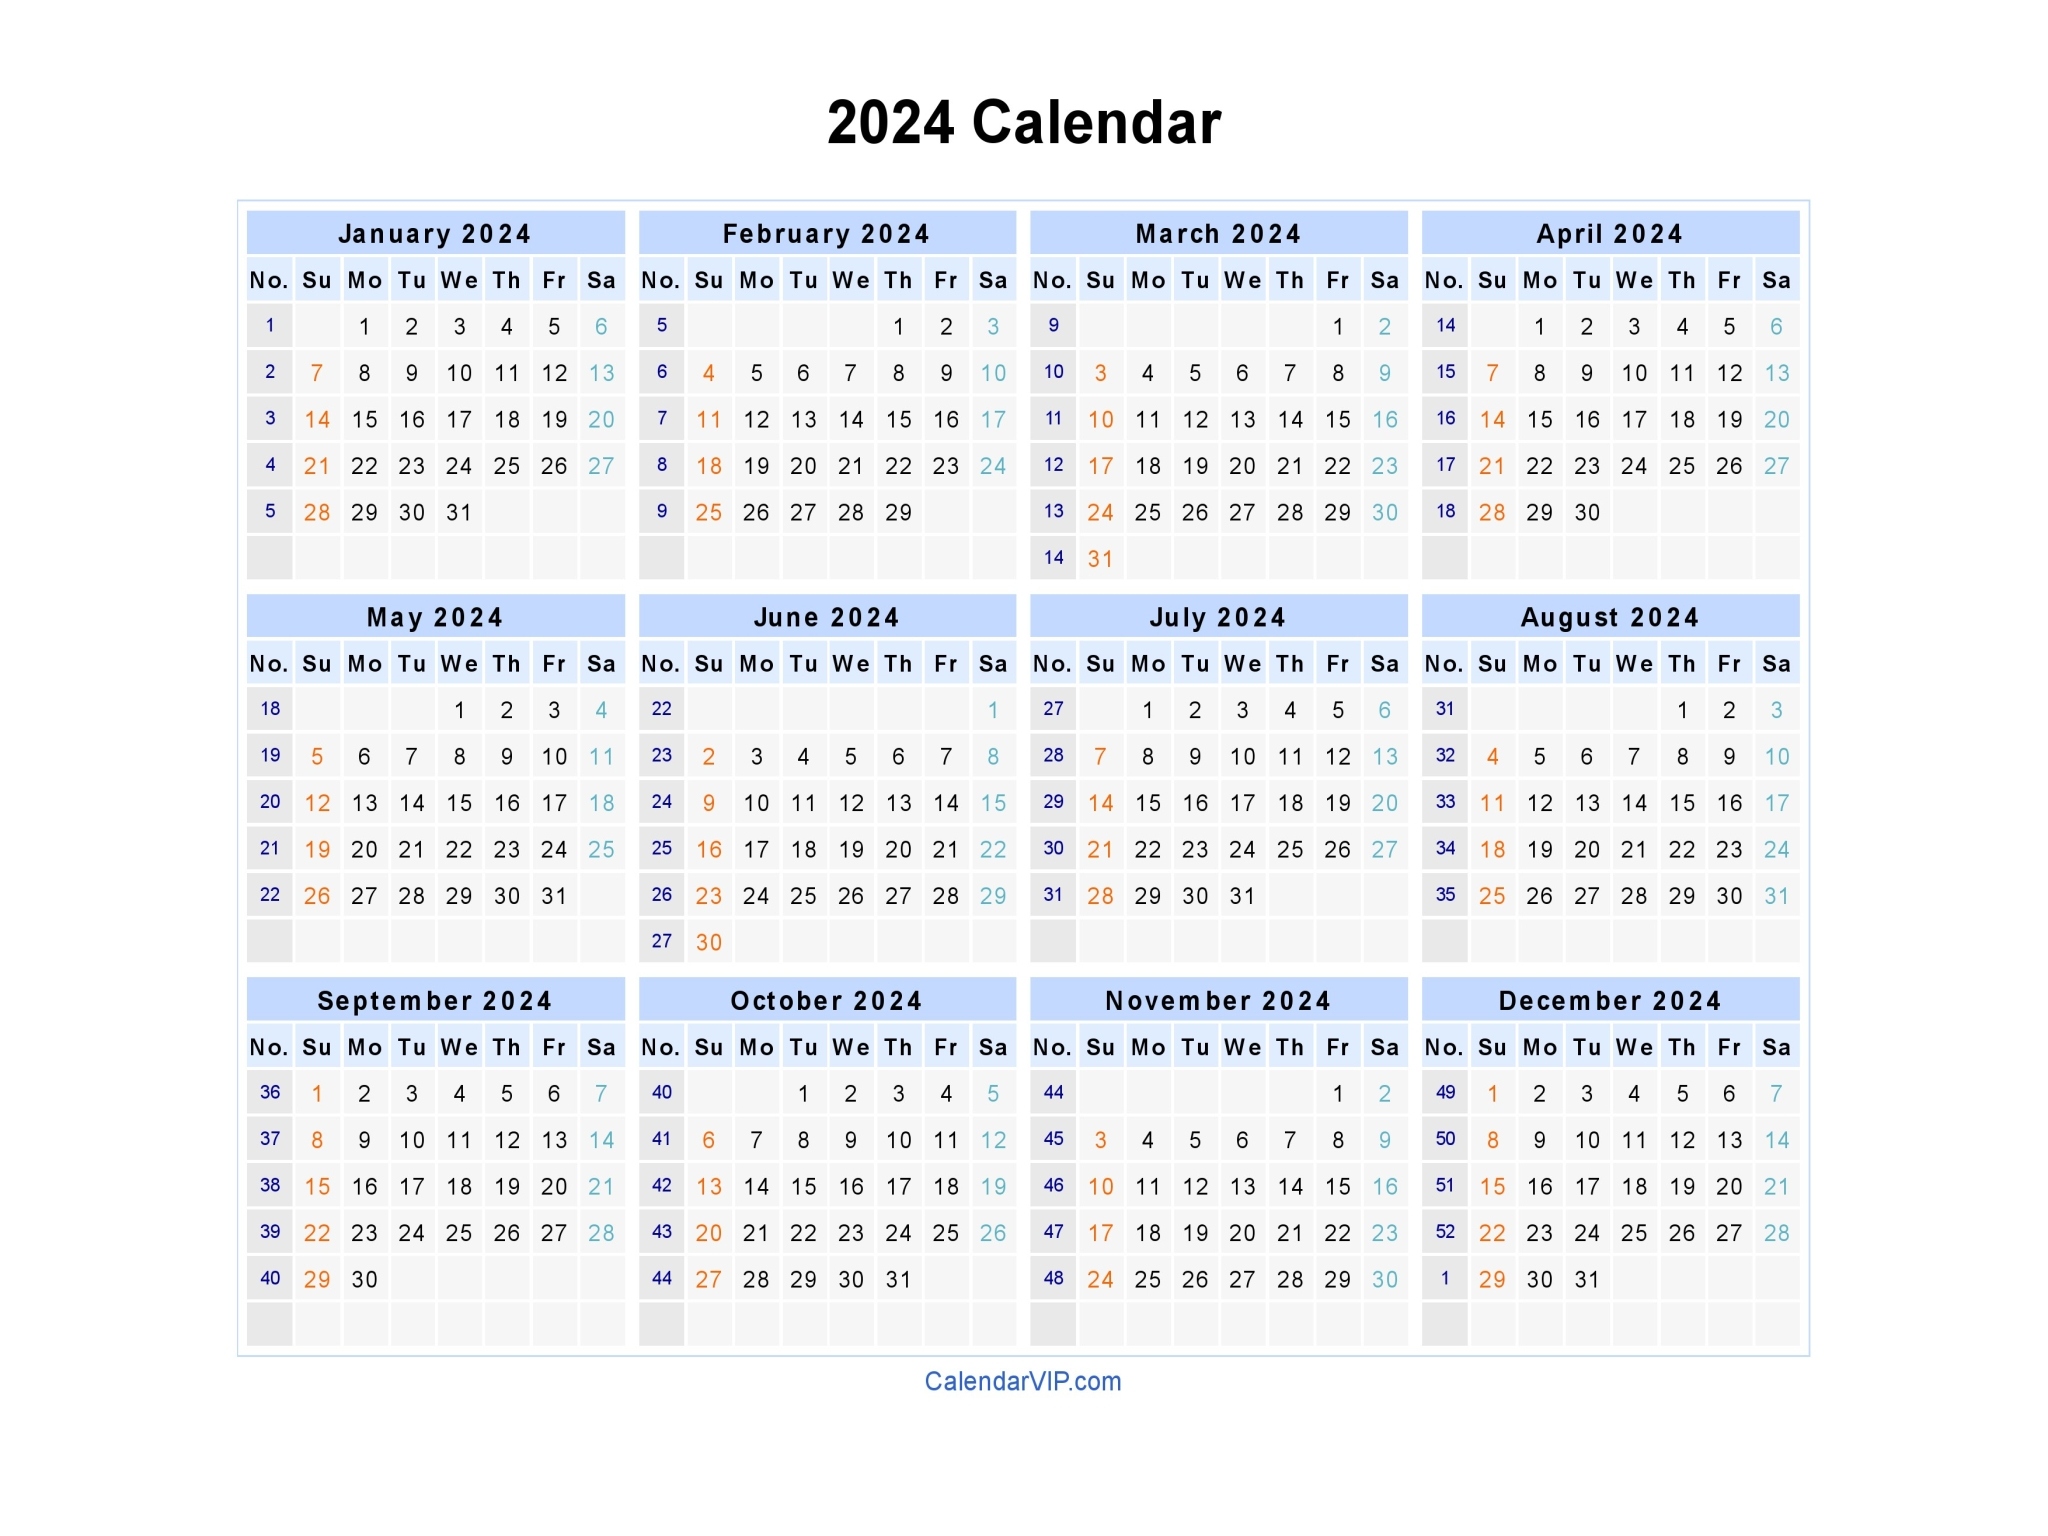 Calendar 2024 In Excel Calendar 2024 All Holidays - Free Printable 2024 Monthly Calendar With Holidays Landscape